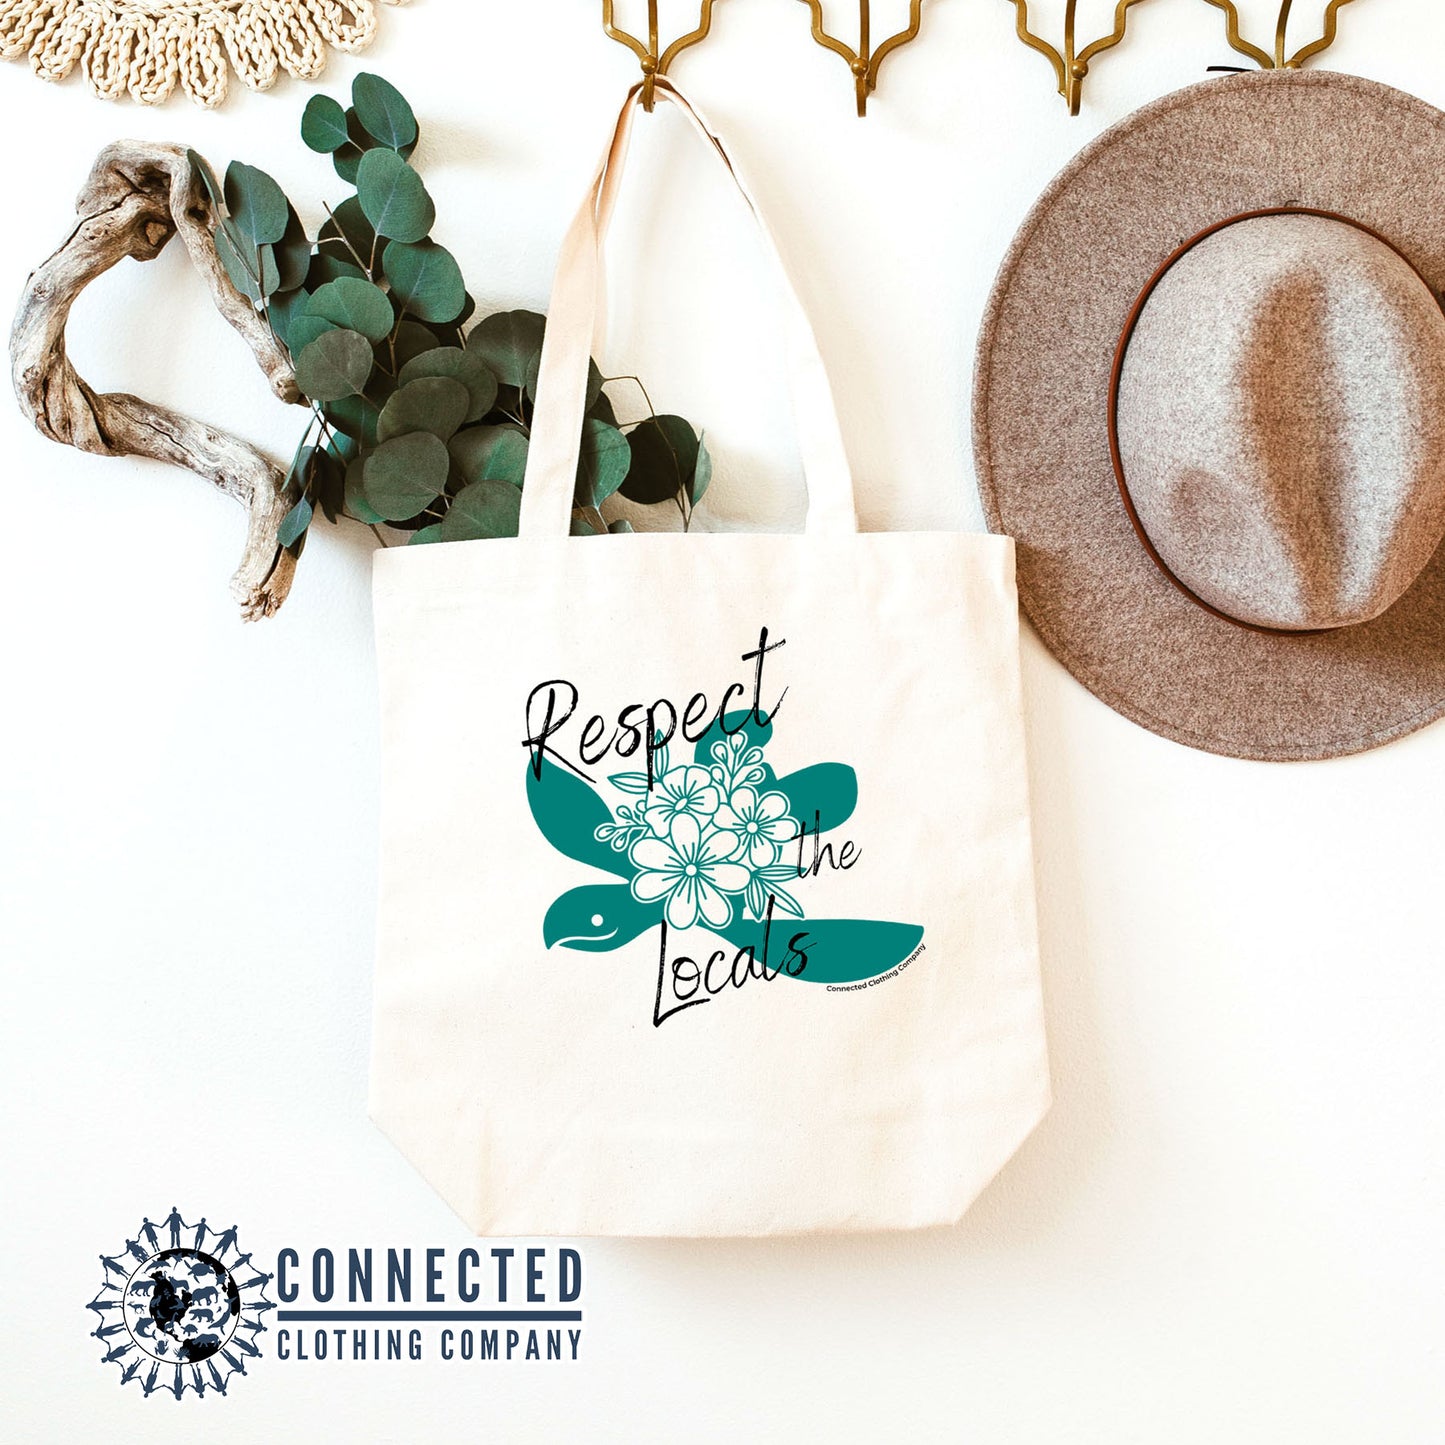 Respect The Locals Sea Turtle Tote - Connected Clothing Company - 10% of proceeds donated to sea turtle conservation